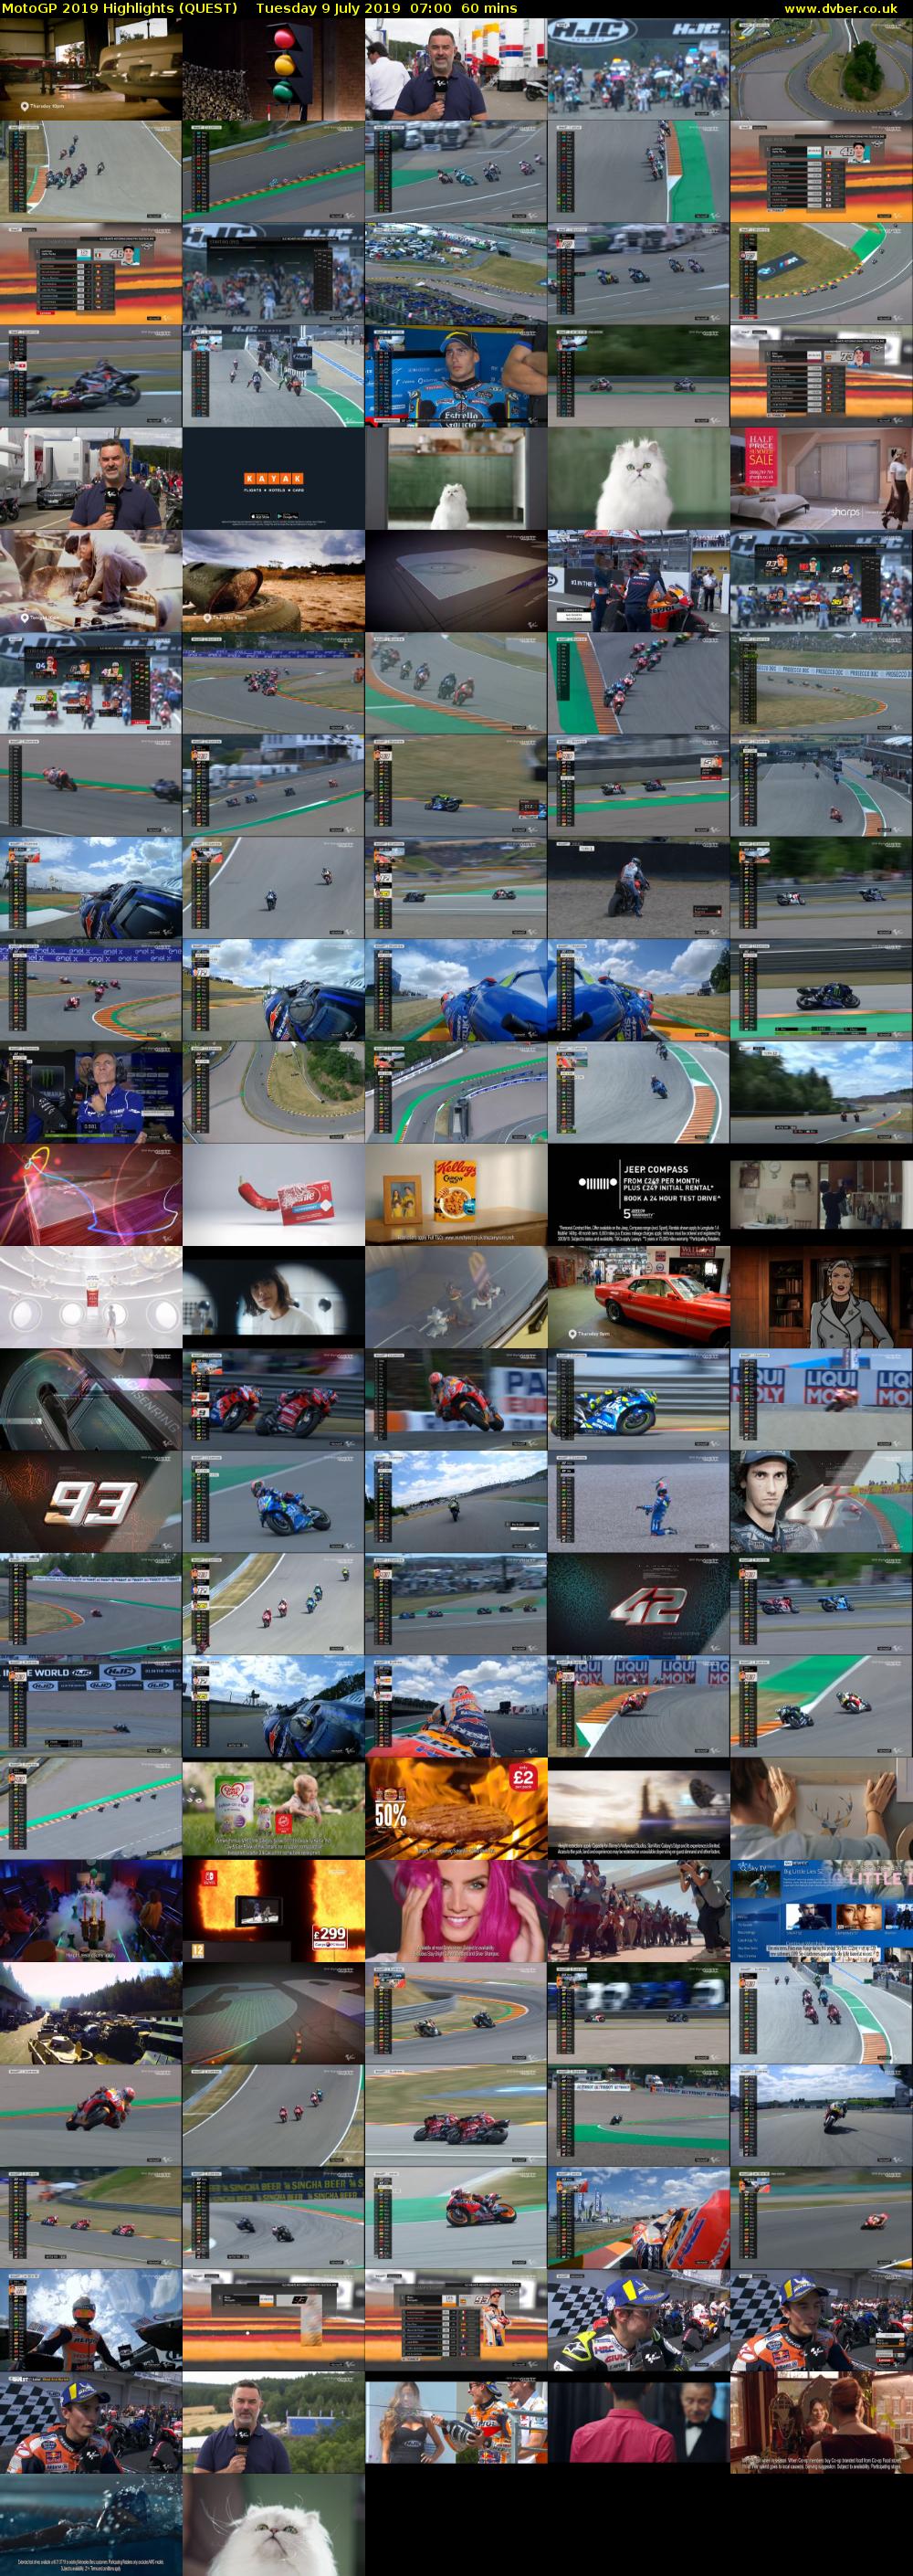 MotoGP 2019 Highlights (QUEST) Tuesday 9 July 2019 07:00 - 08:00